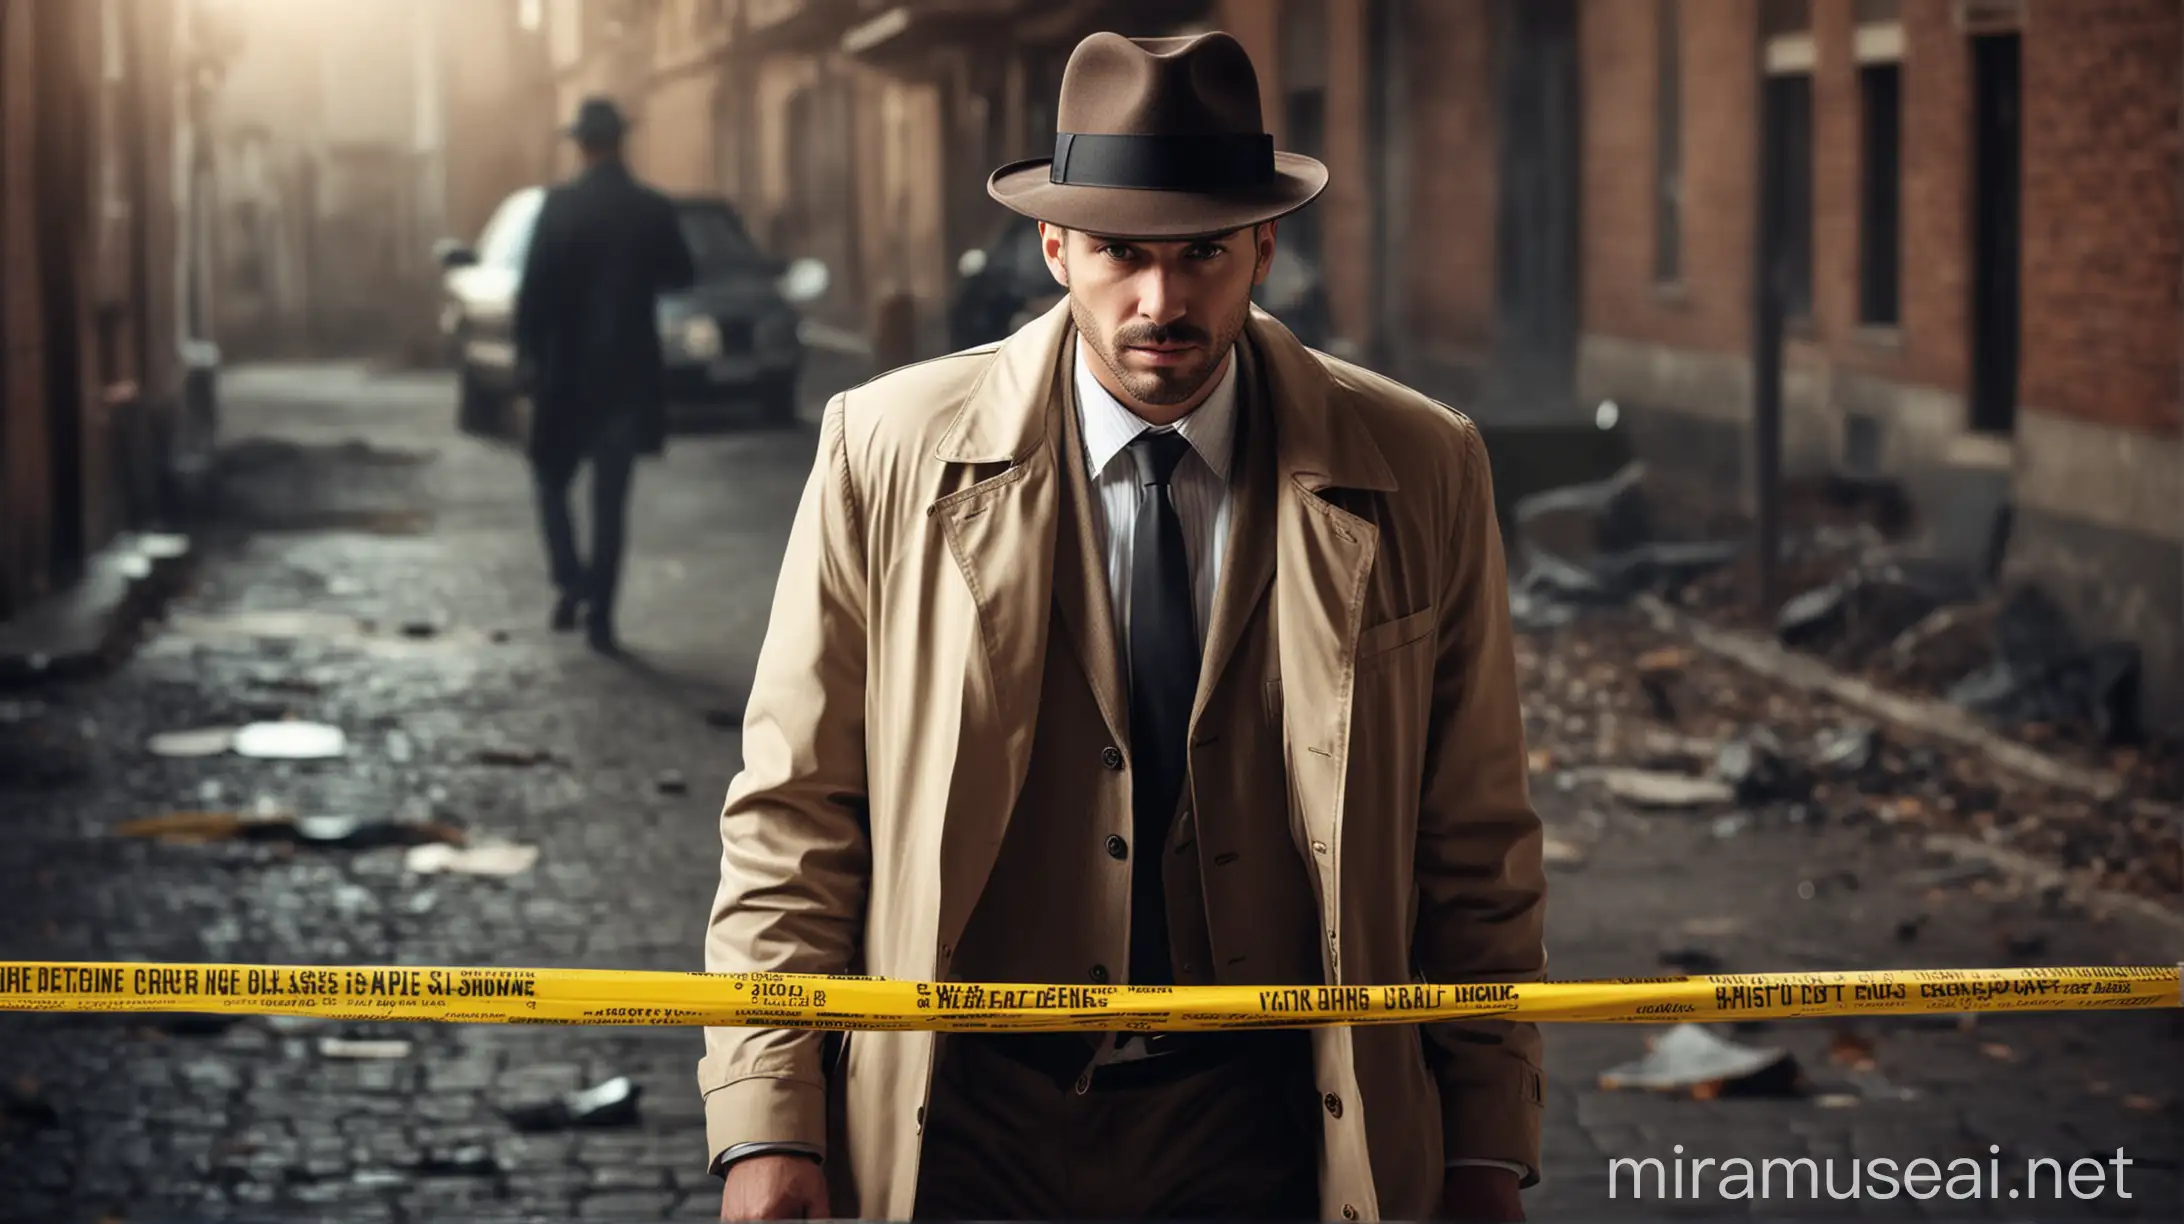 Detective Investigating Crime Scene with Magnifying Glass